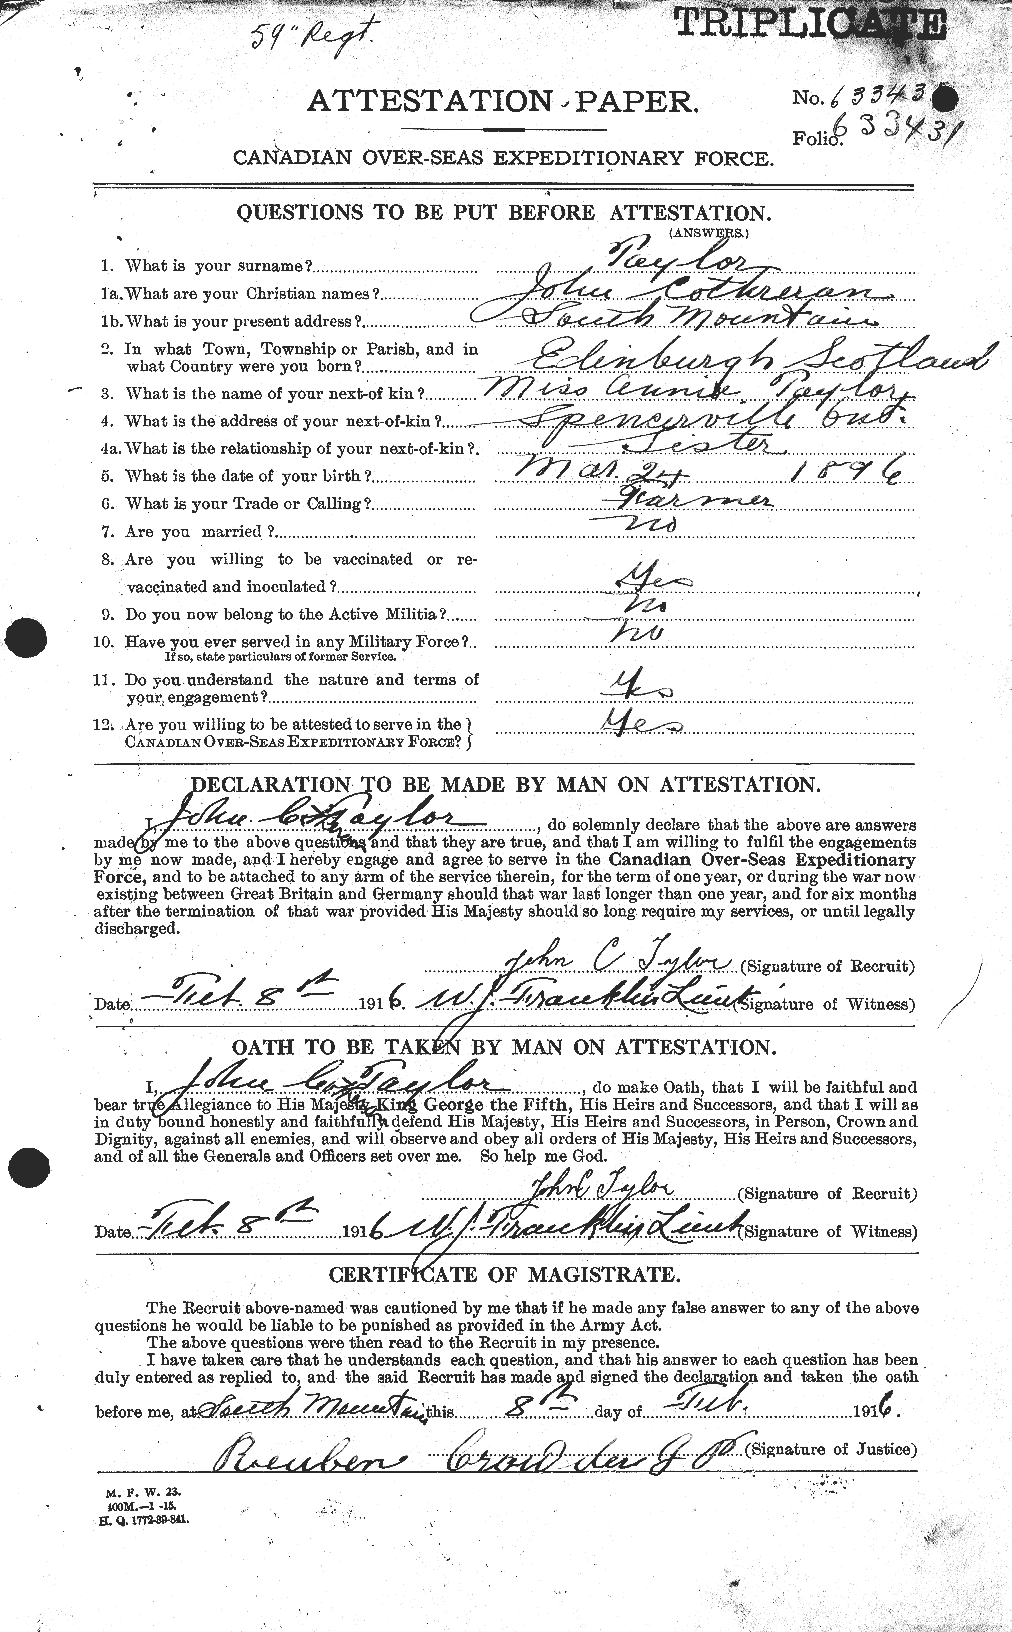 Personnel Records of the First World War - CEF 627060a